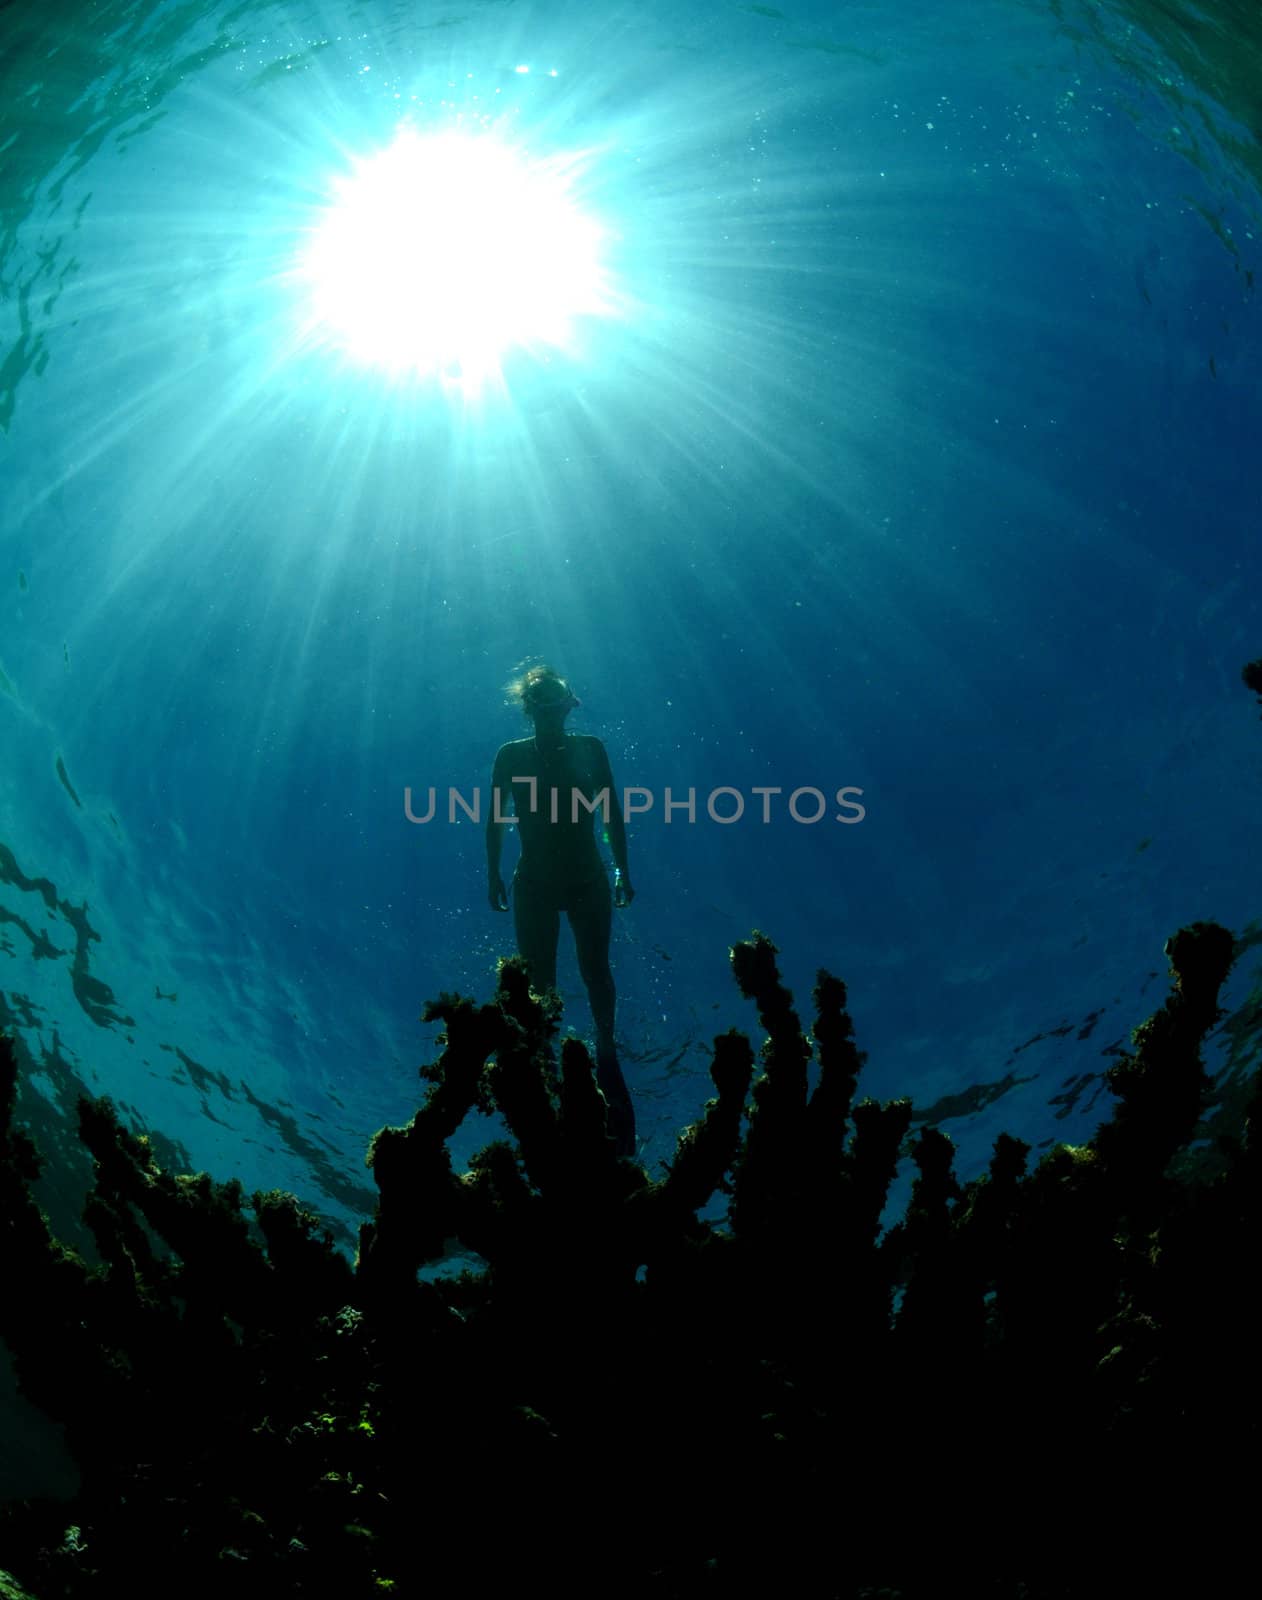 Underwater image of woman snorkeling in the Caribbean with a bright sunburst reflecting off the water